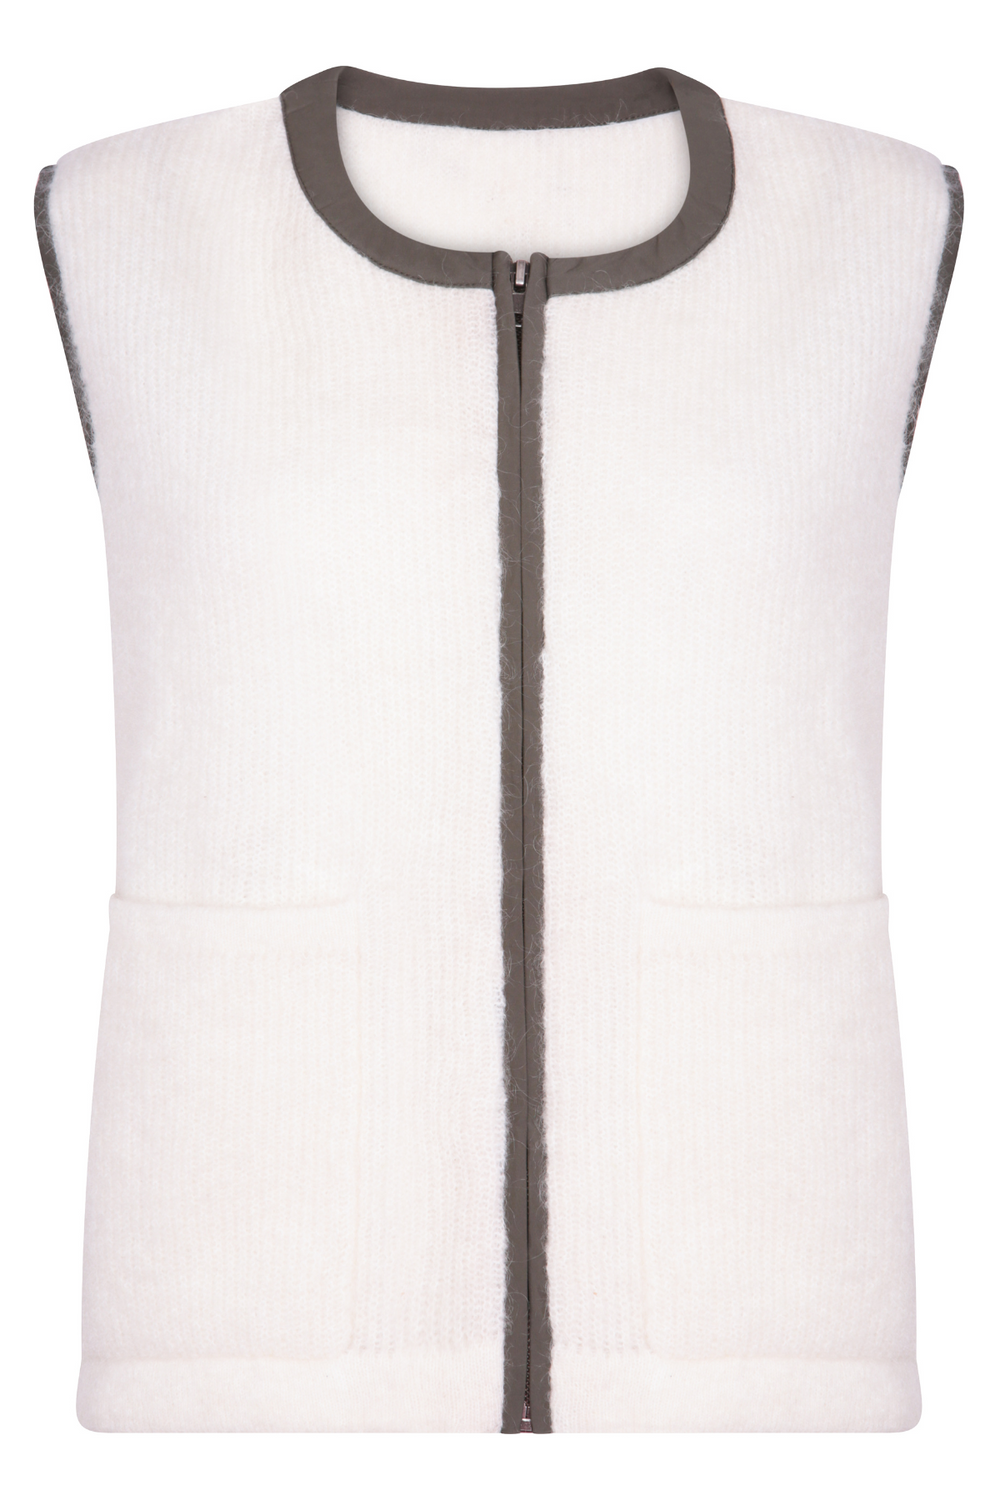 cream mohair gilet with green goretex zip worn by a size UK 8 girl in London